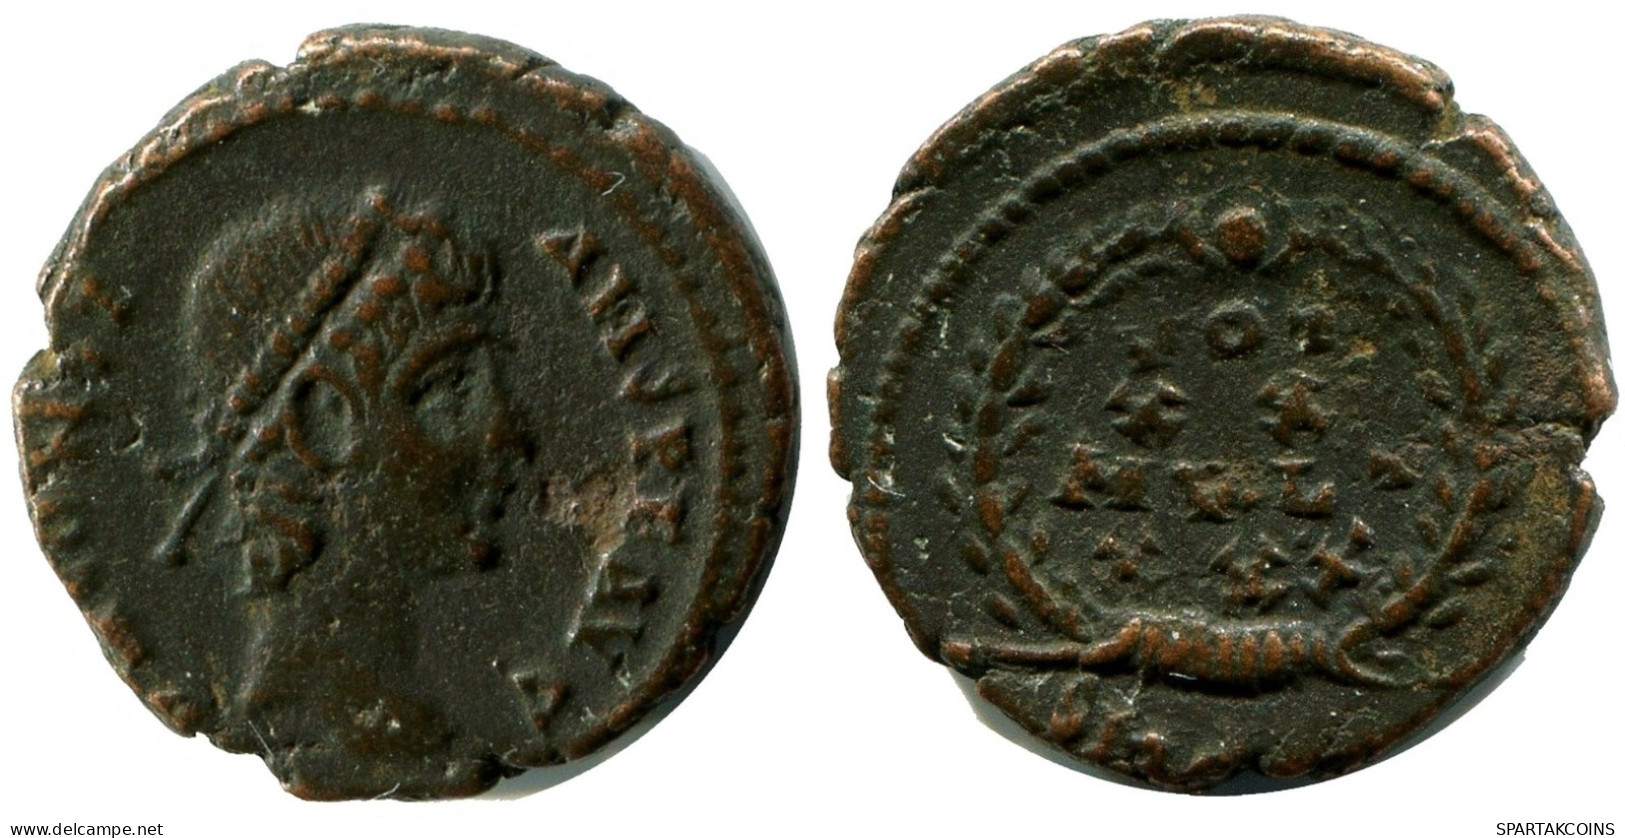 CONSTANS MINTED IN ALEKSANDRIA FROM THE ROYAL ONTARIO MUSEUM #ANC11331.14.D.A - The Christian Empire (307 AD Tot 363 AD)